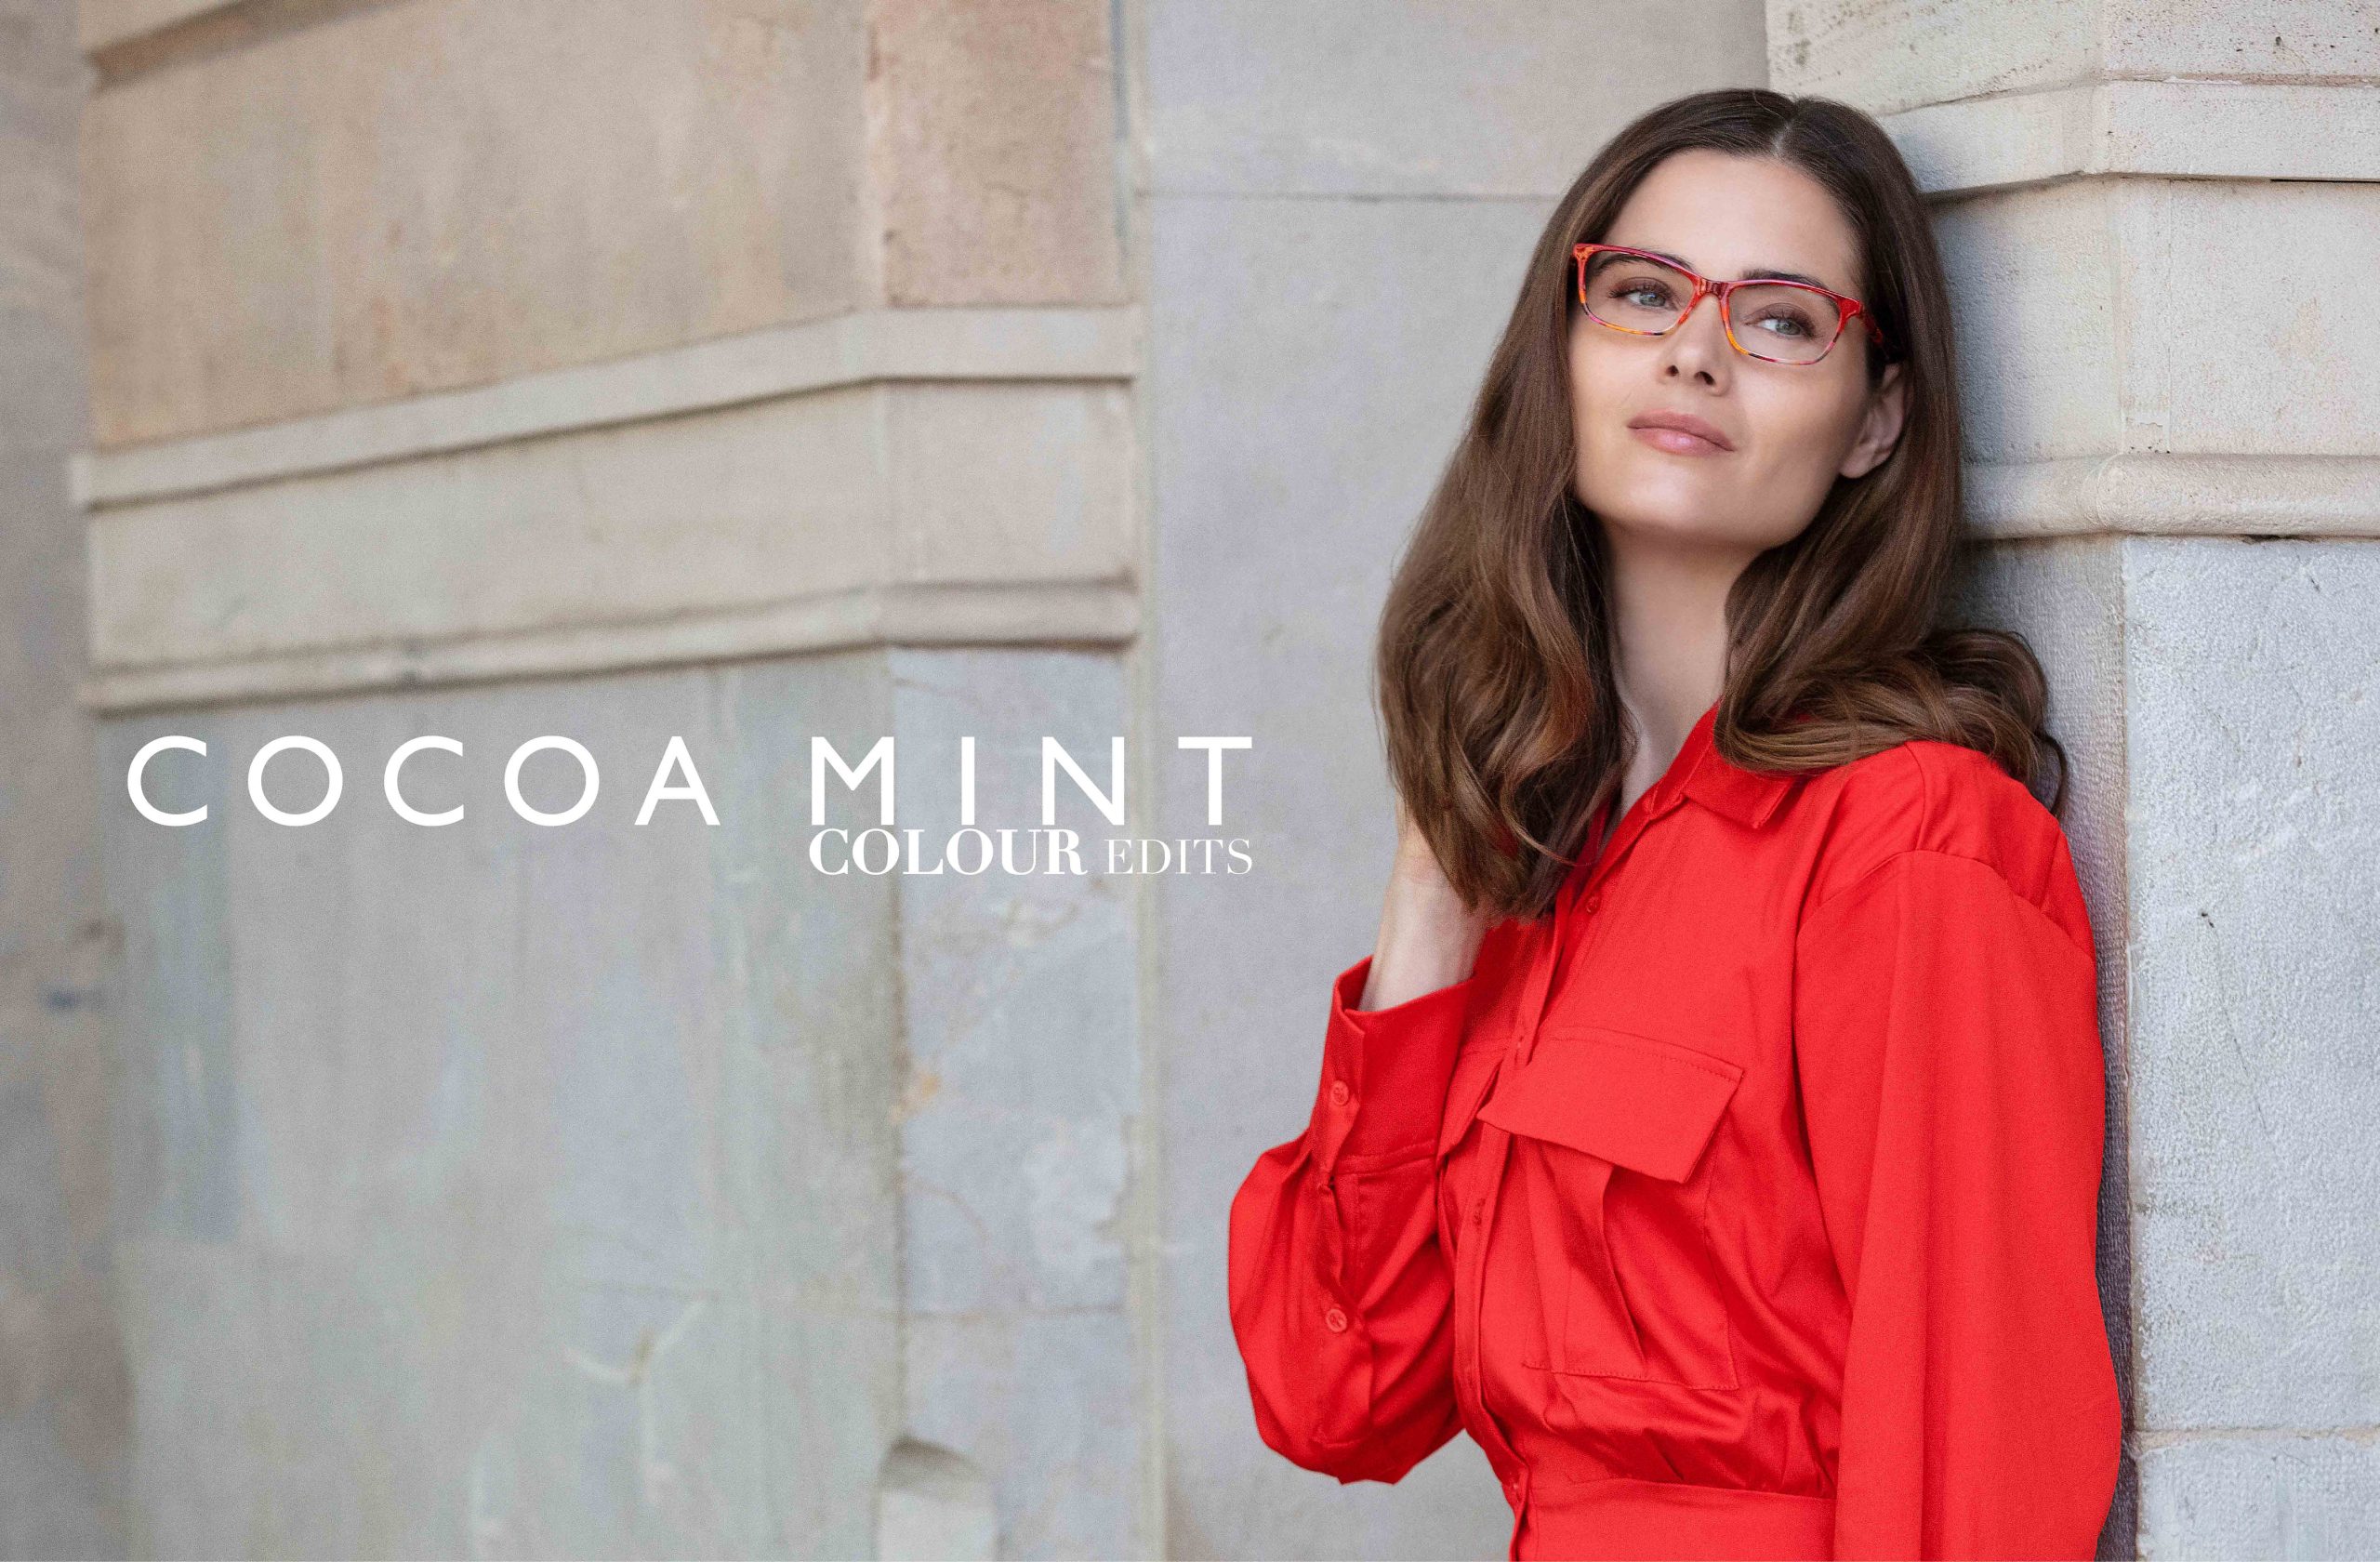 Image of model in Cocoa Mint Colour Edits frame